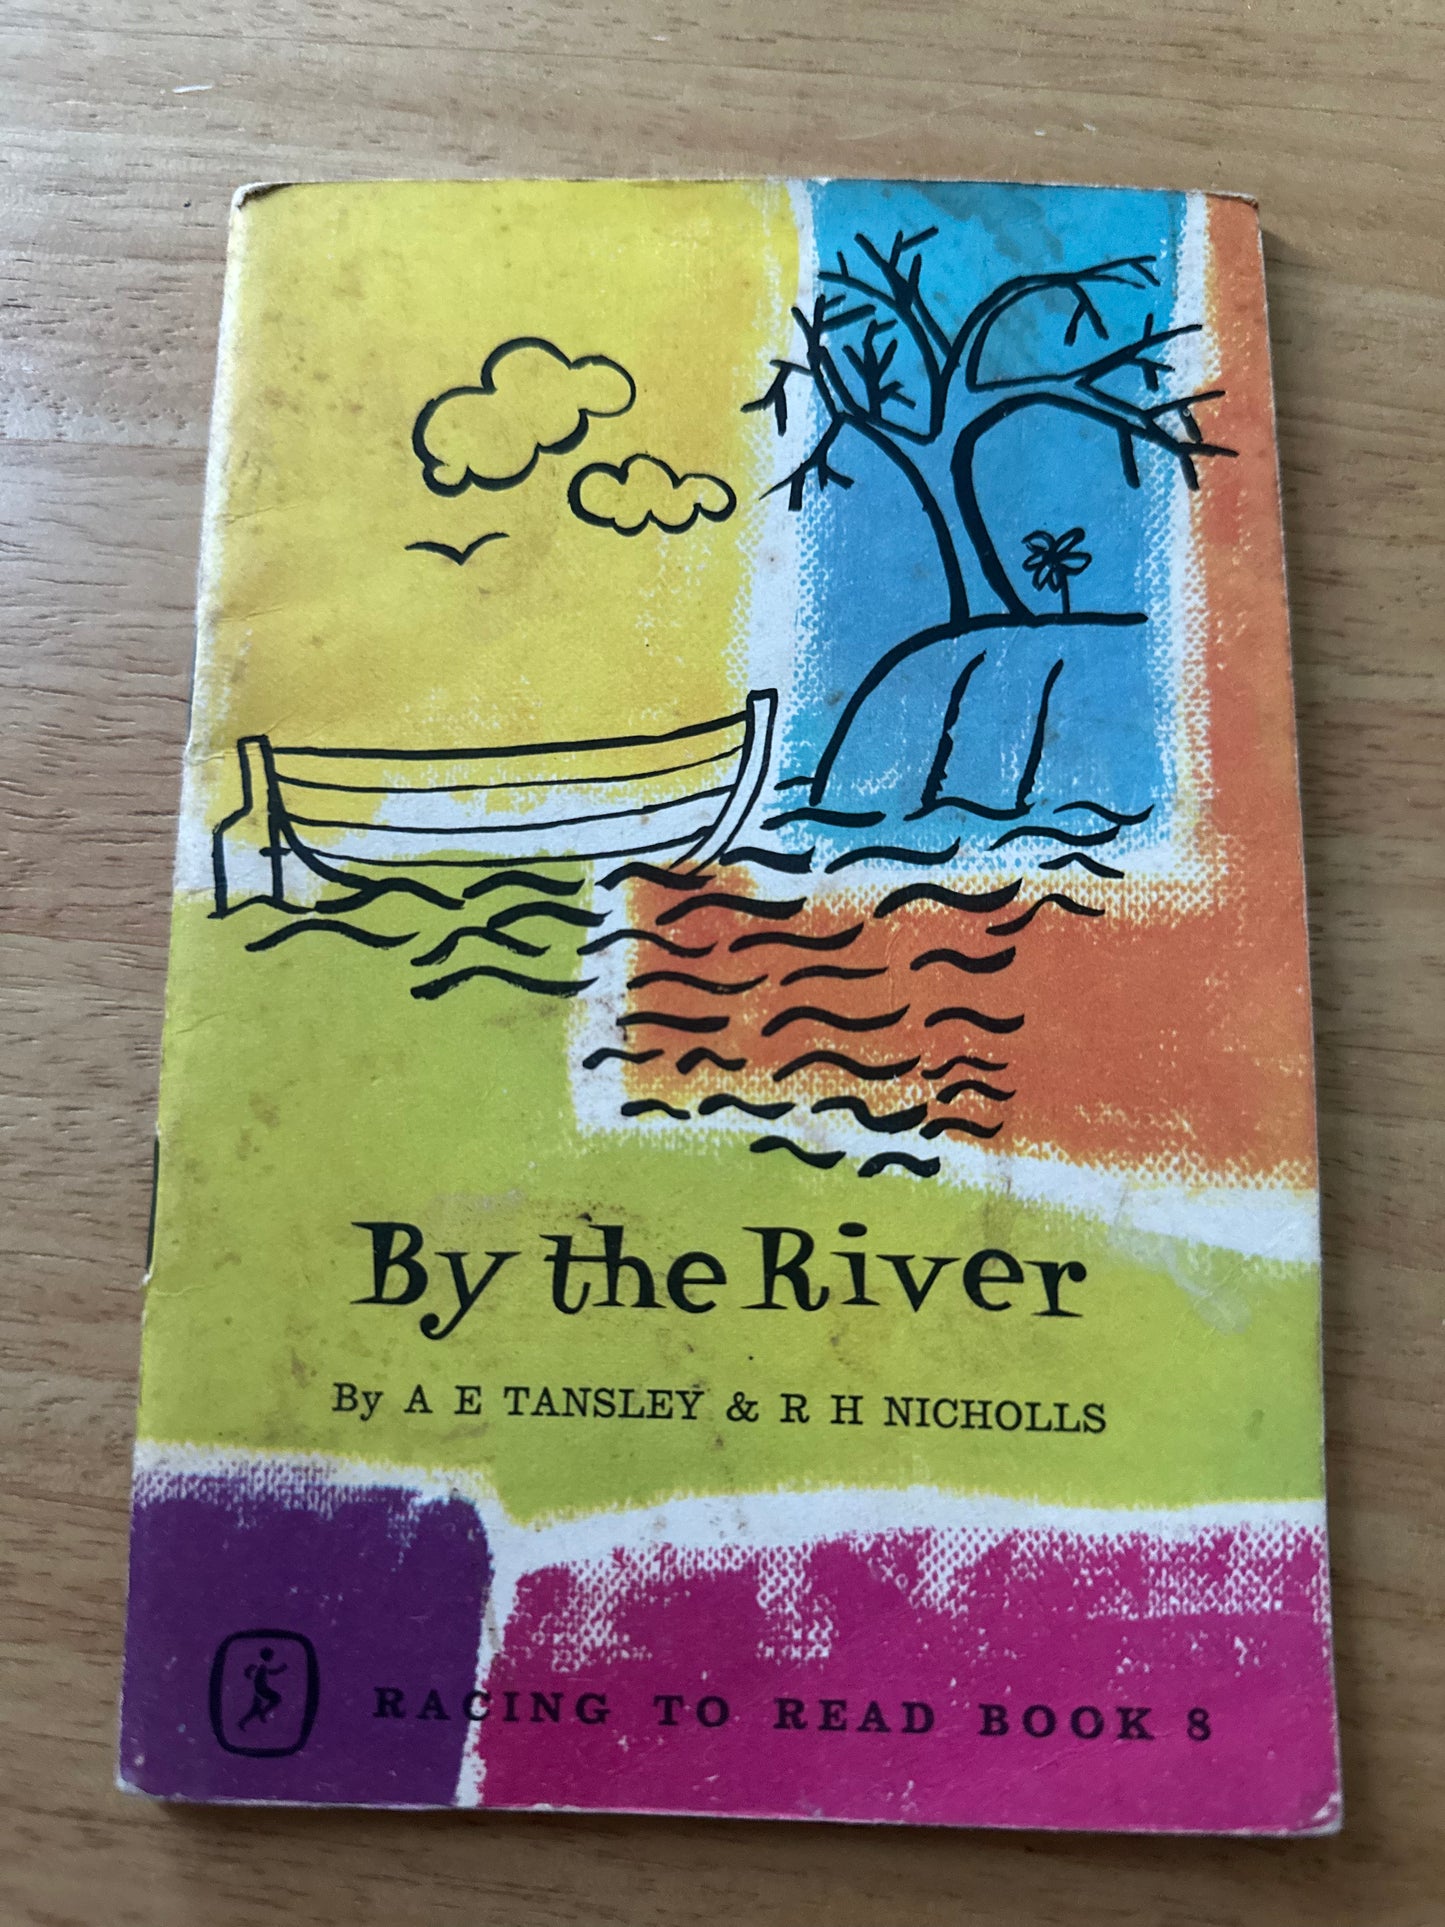 1962*1st* Racing To Read Bk8 By The River - A. E. Tansley & R. H. Nicholls(F. Pash illustration) E. J. Arnold & Son Ltd.